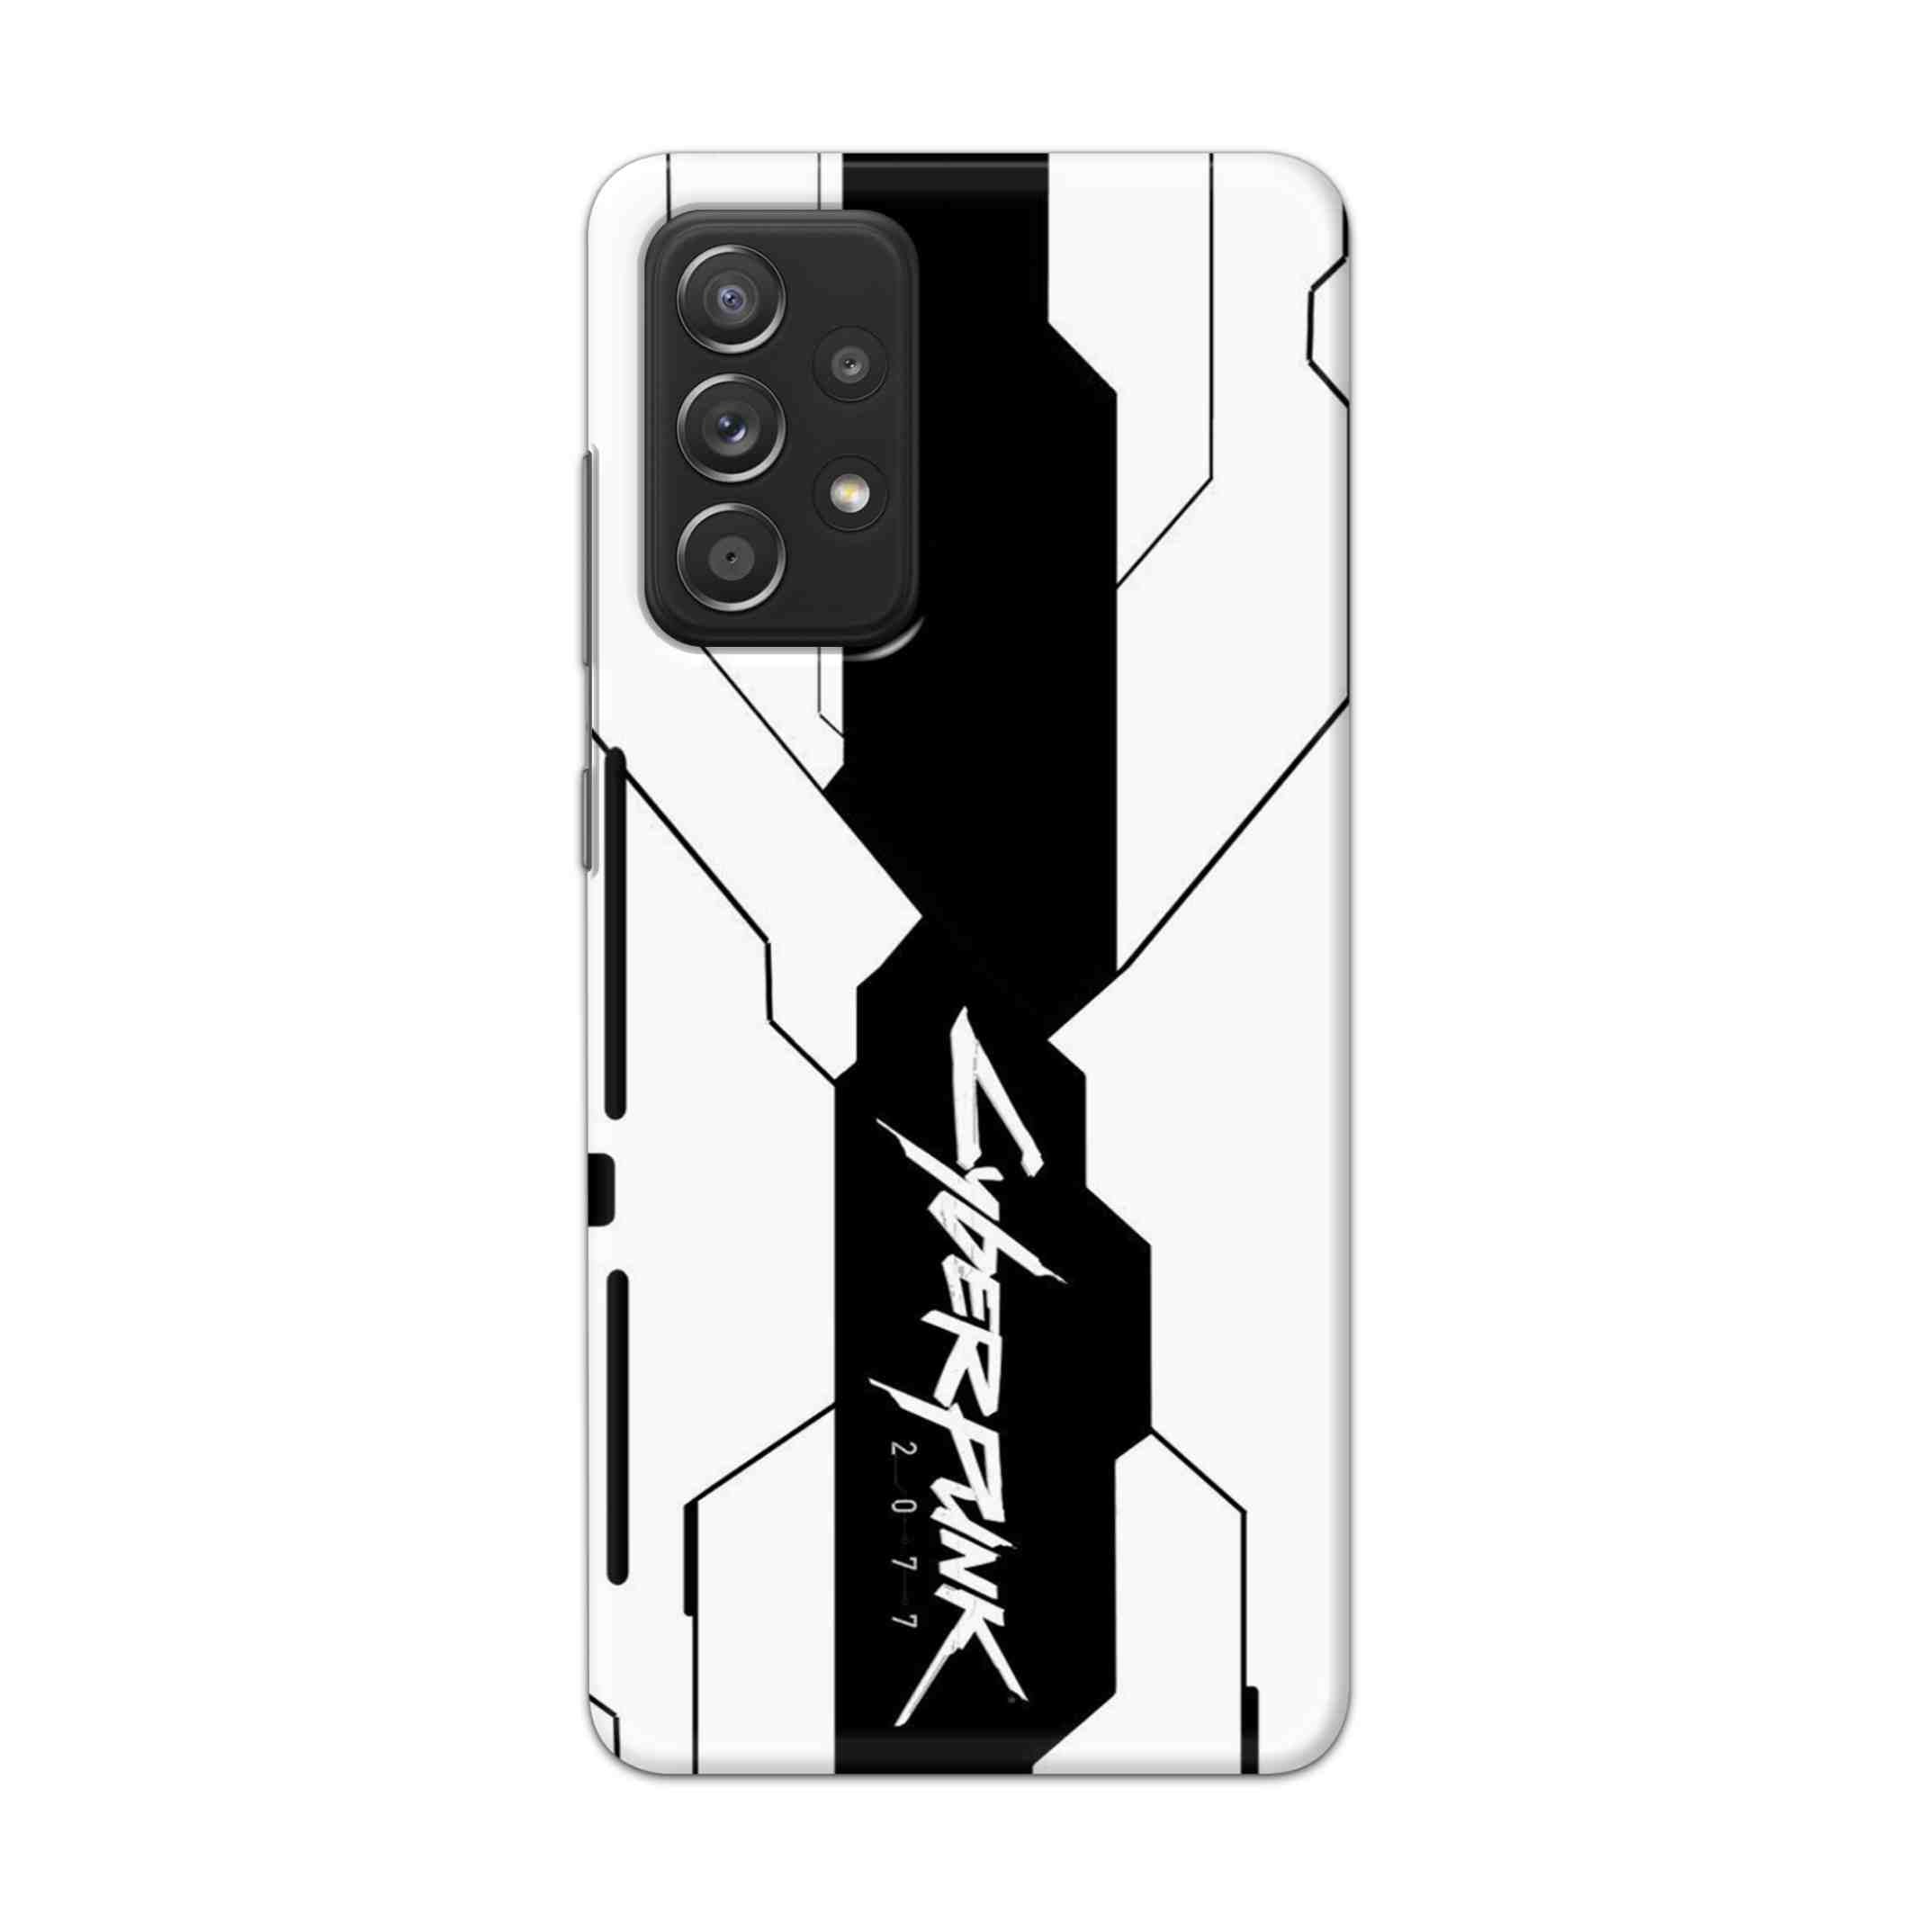 Buy Cyberpunk 2077 Hard Back Mobile Phone Case Cover For Samsung Galaxy A52 Online